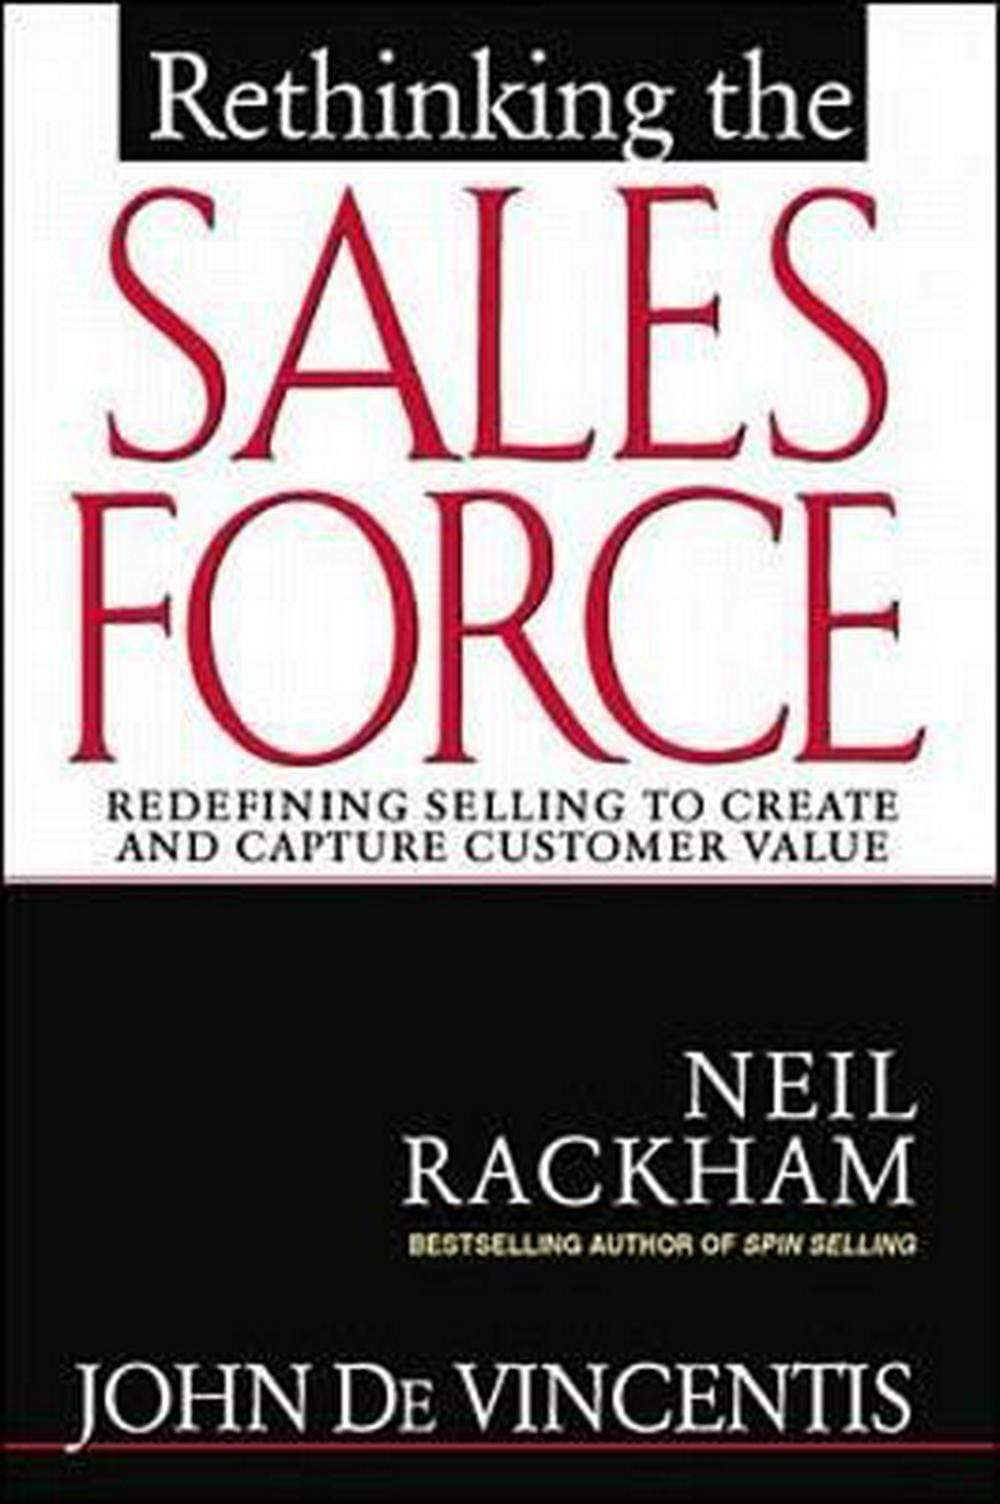 *RETHINKING THE SALES FORCE